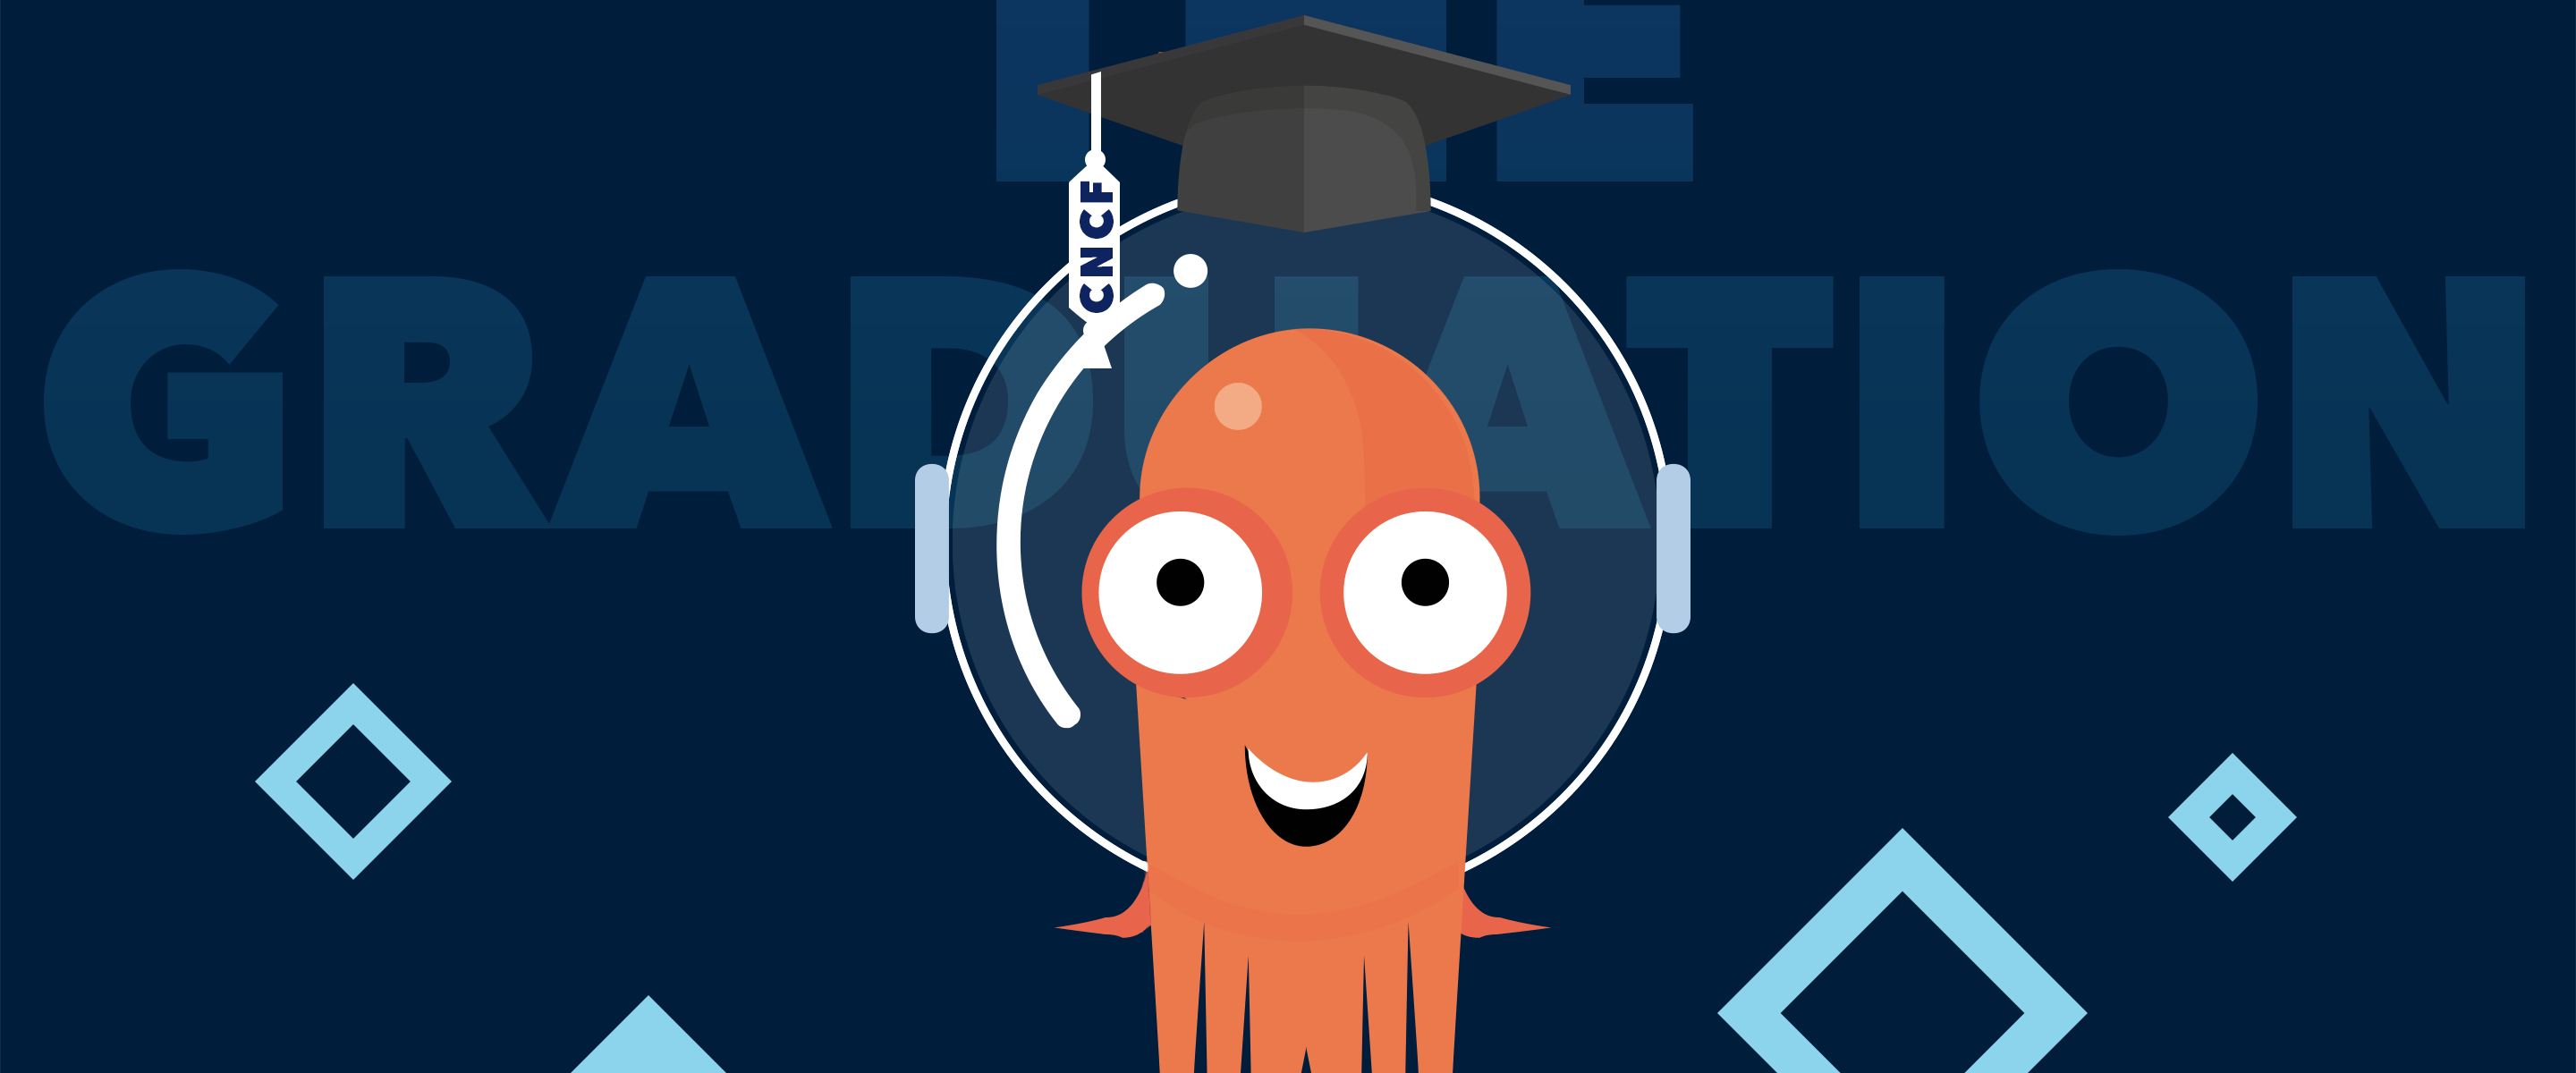 The orange Argo cartoon octopus is smiling and wearing a graduation hat, in front of text that says "The Graduation"